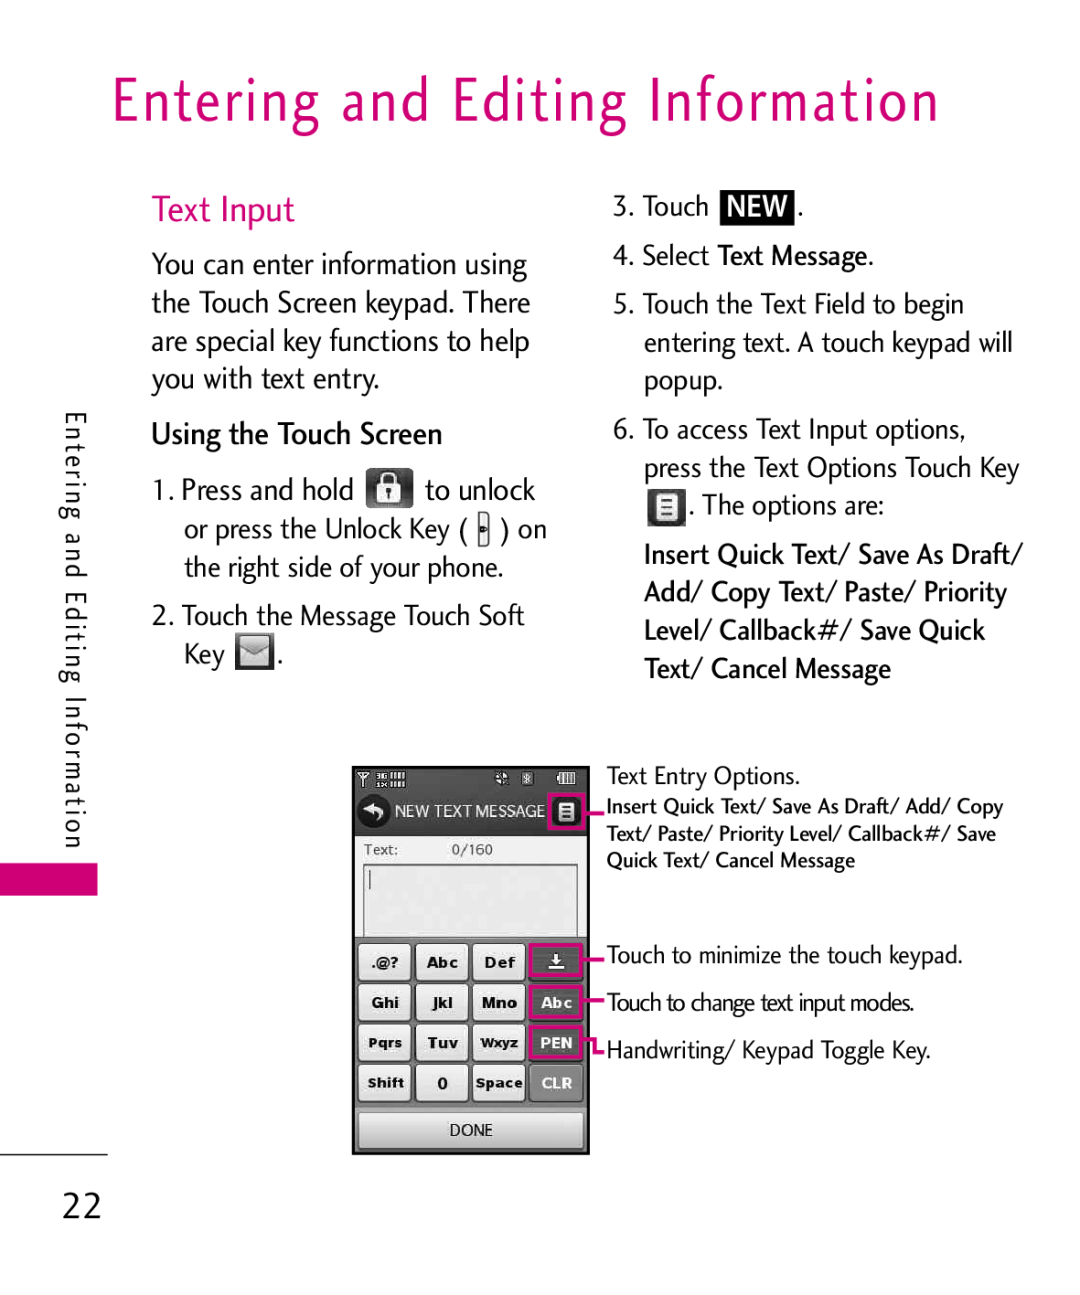 LG Electronics MMBB0379501 Entering and Editing Information, Using the Touch Screen, Touch the Message Touch Soft Key 